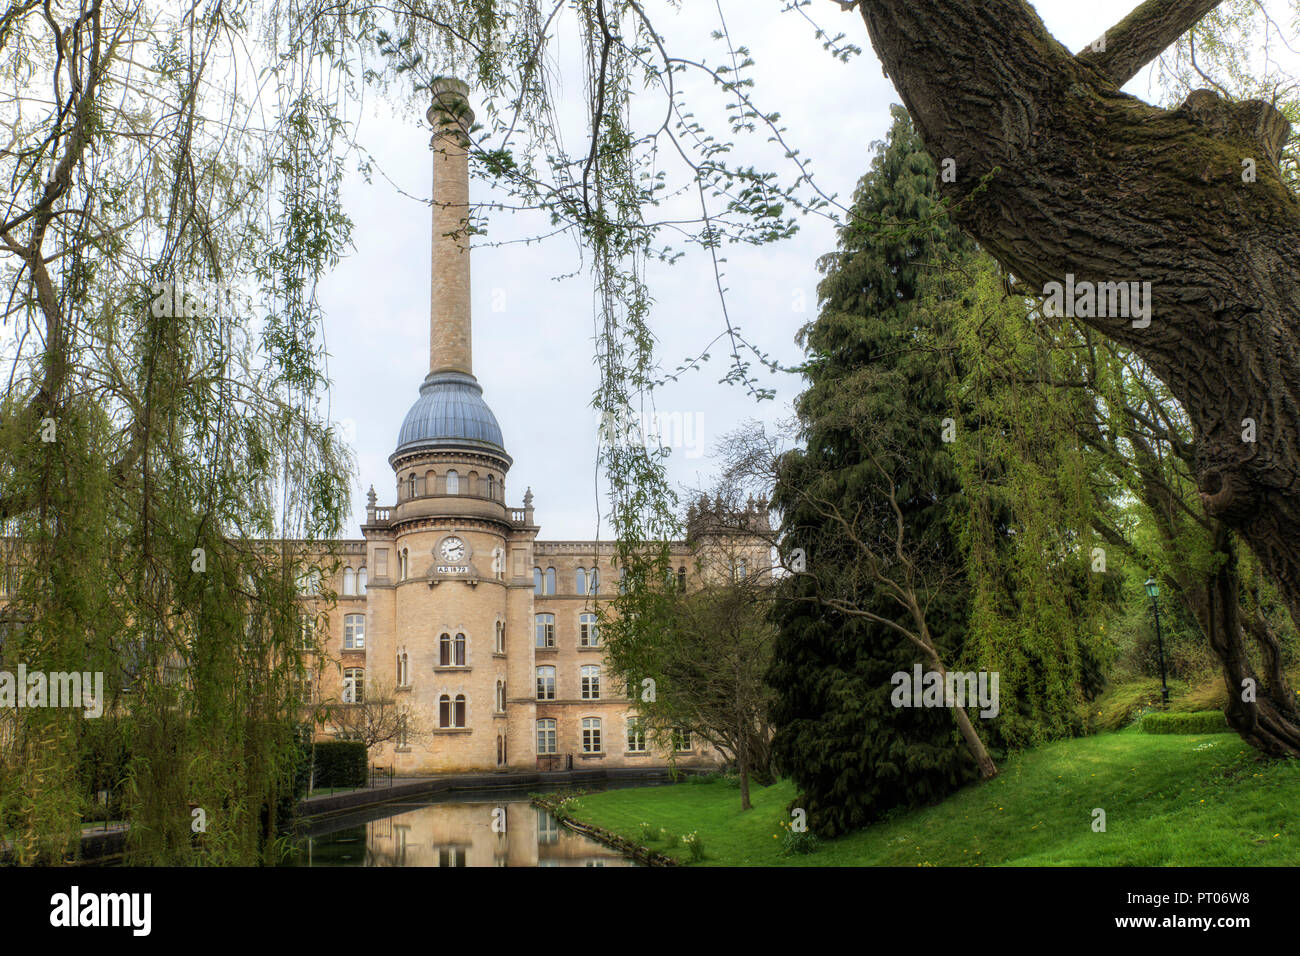 Bliss Tweed Mill, Cotswold, Oxfordshire, England, Regno Unito Foto Stock